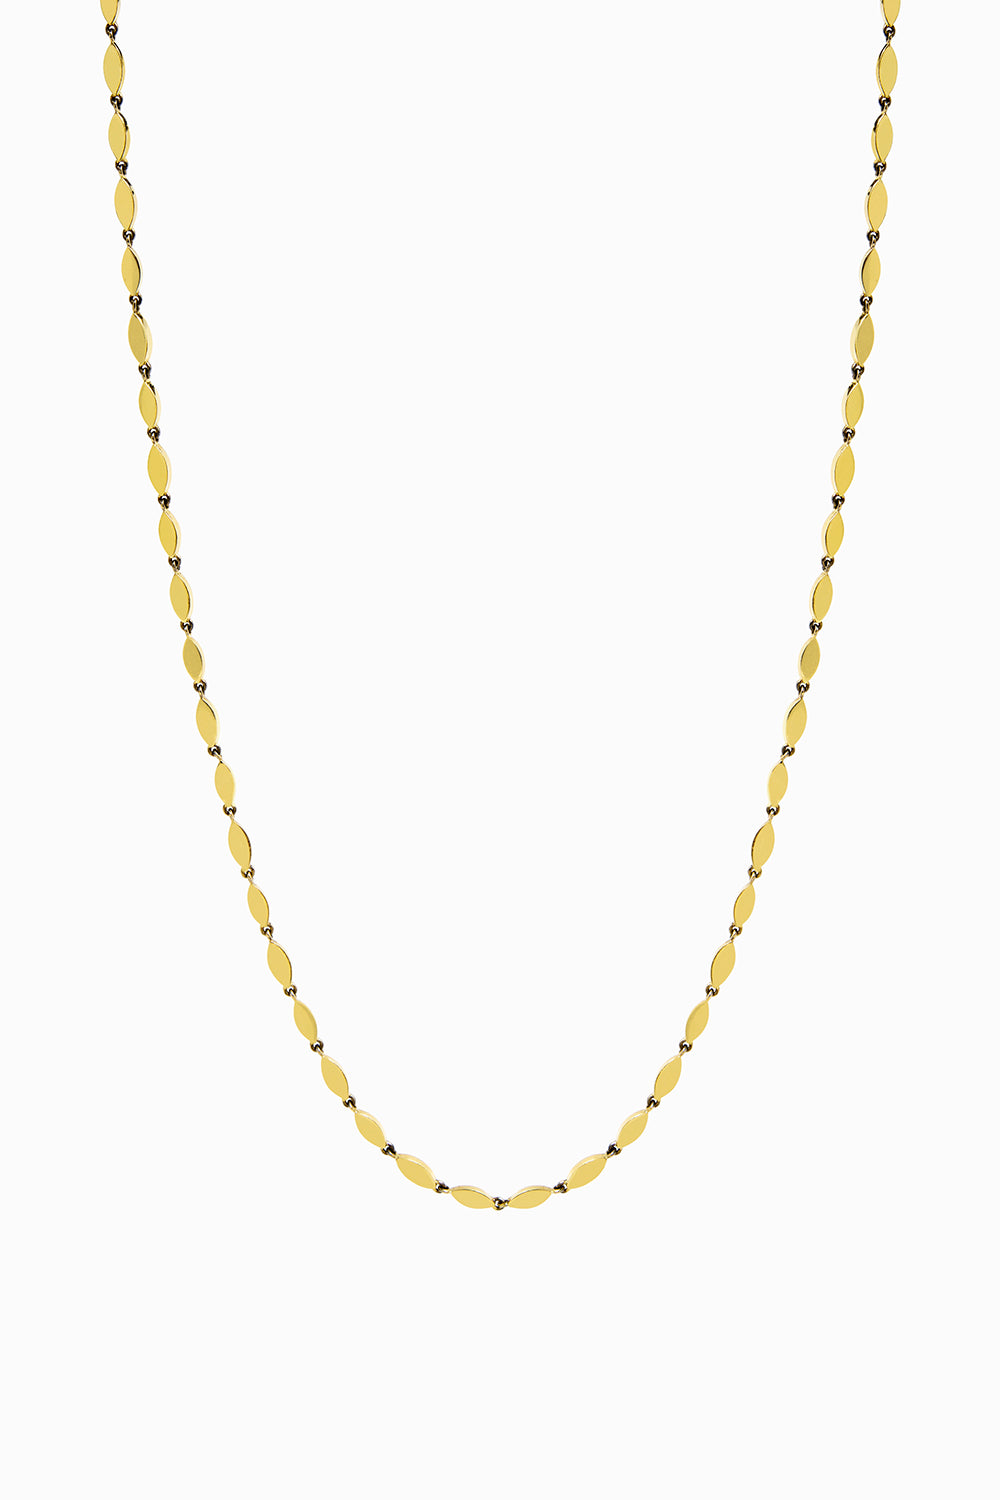 Gold seeds necklace